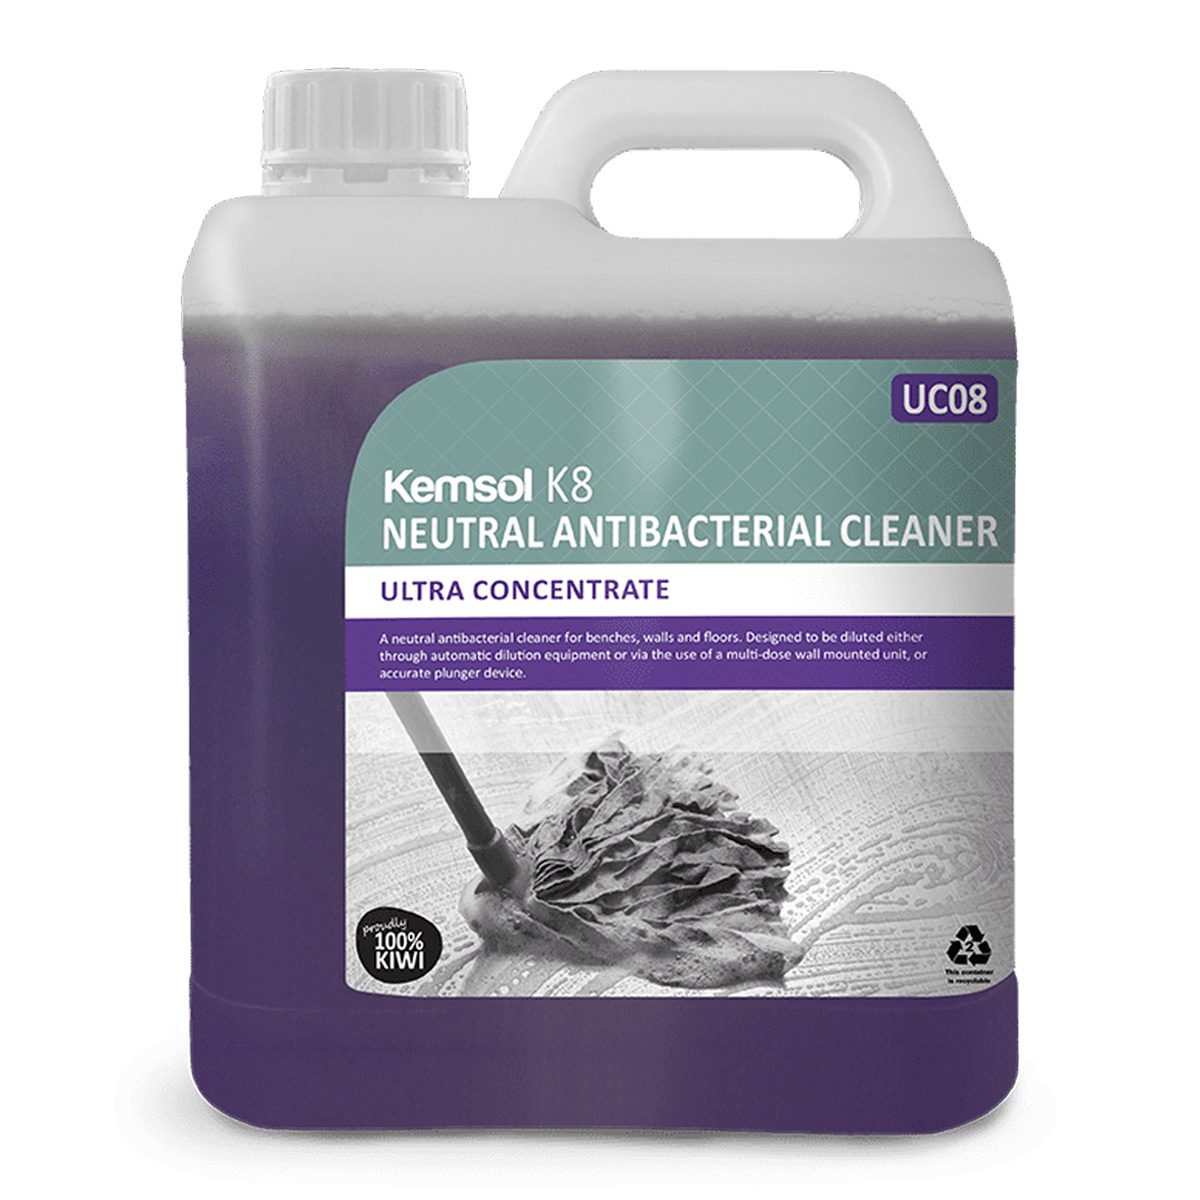 cleaning-products-floorcare-kemsol-K8-u/c-neutral-antibac-cleaner-2L-litre-for-benches-walls-floors-automatic-dilution-equipment-use-multi-dose-wall-mounted-unit-accurate-plunger-vjs-distributors-KK8